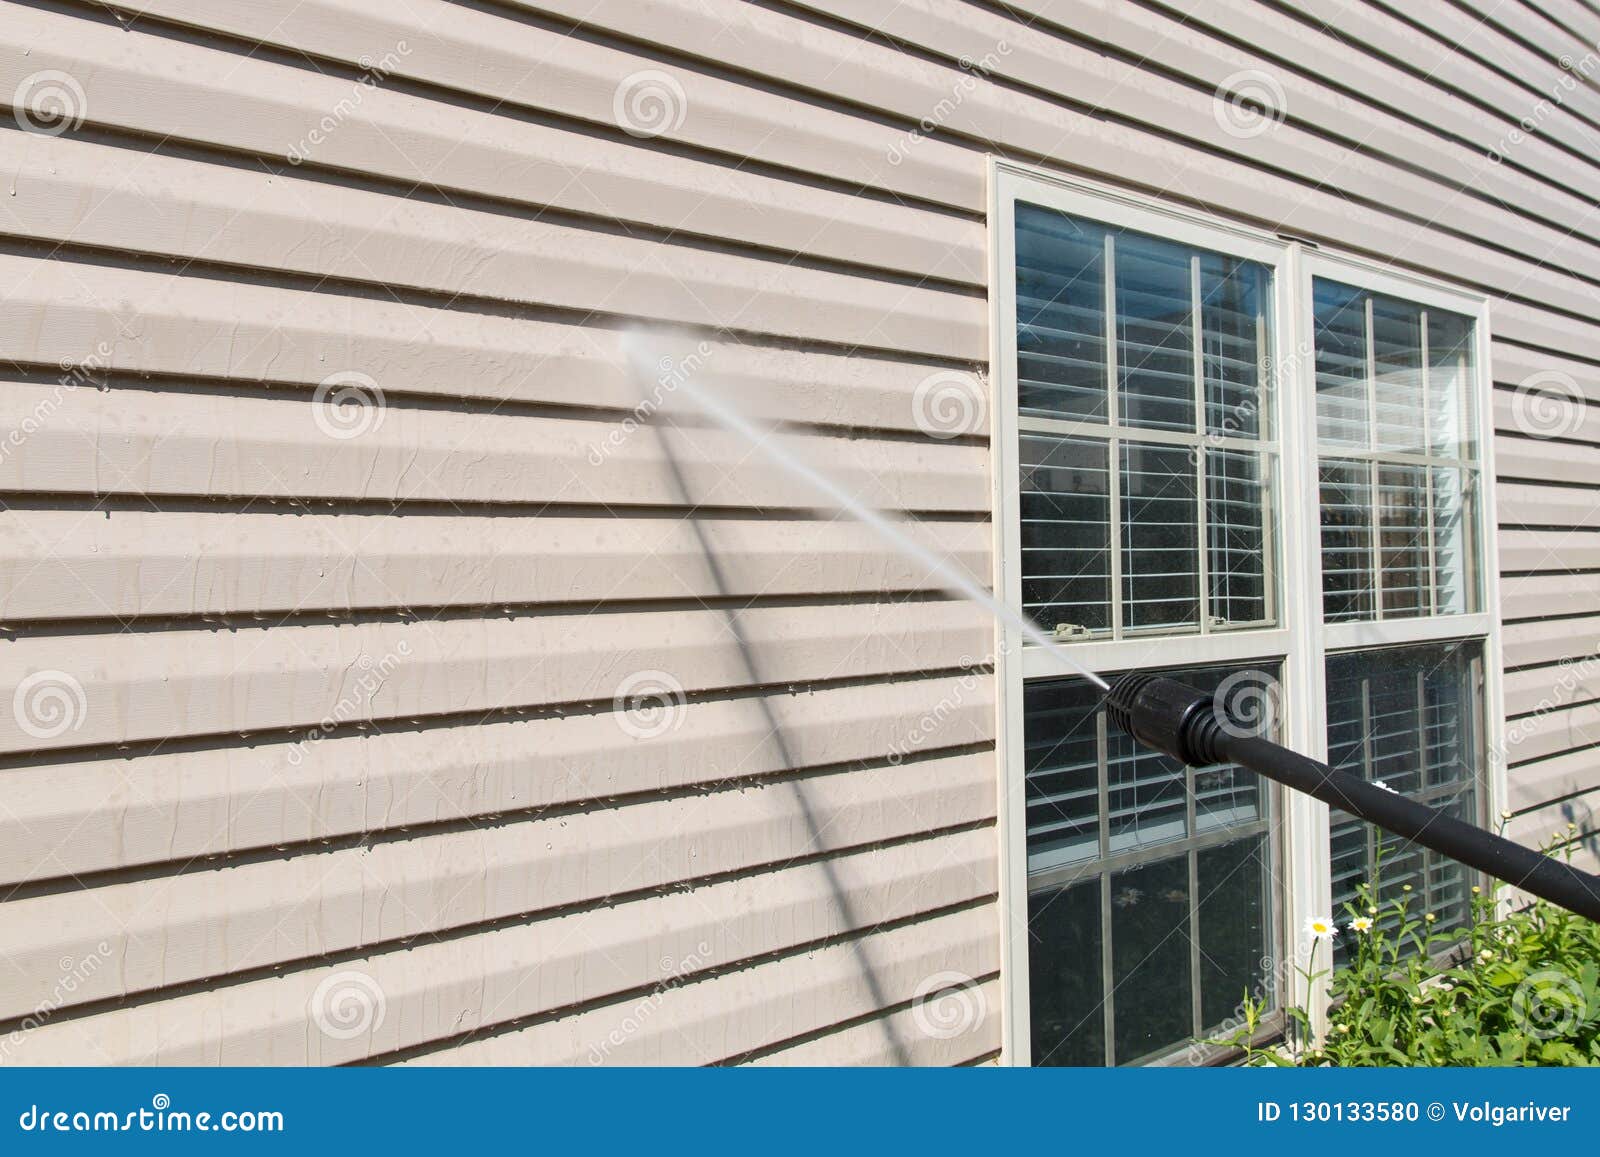 power washing. house wall siding cleaning with high pressure water jet.